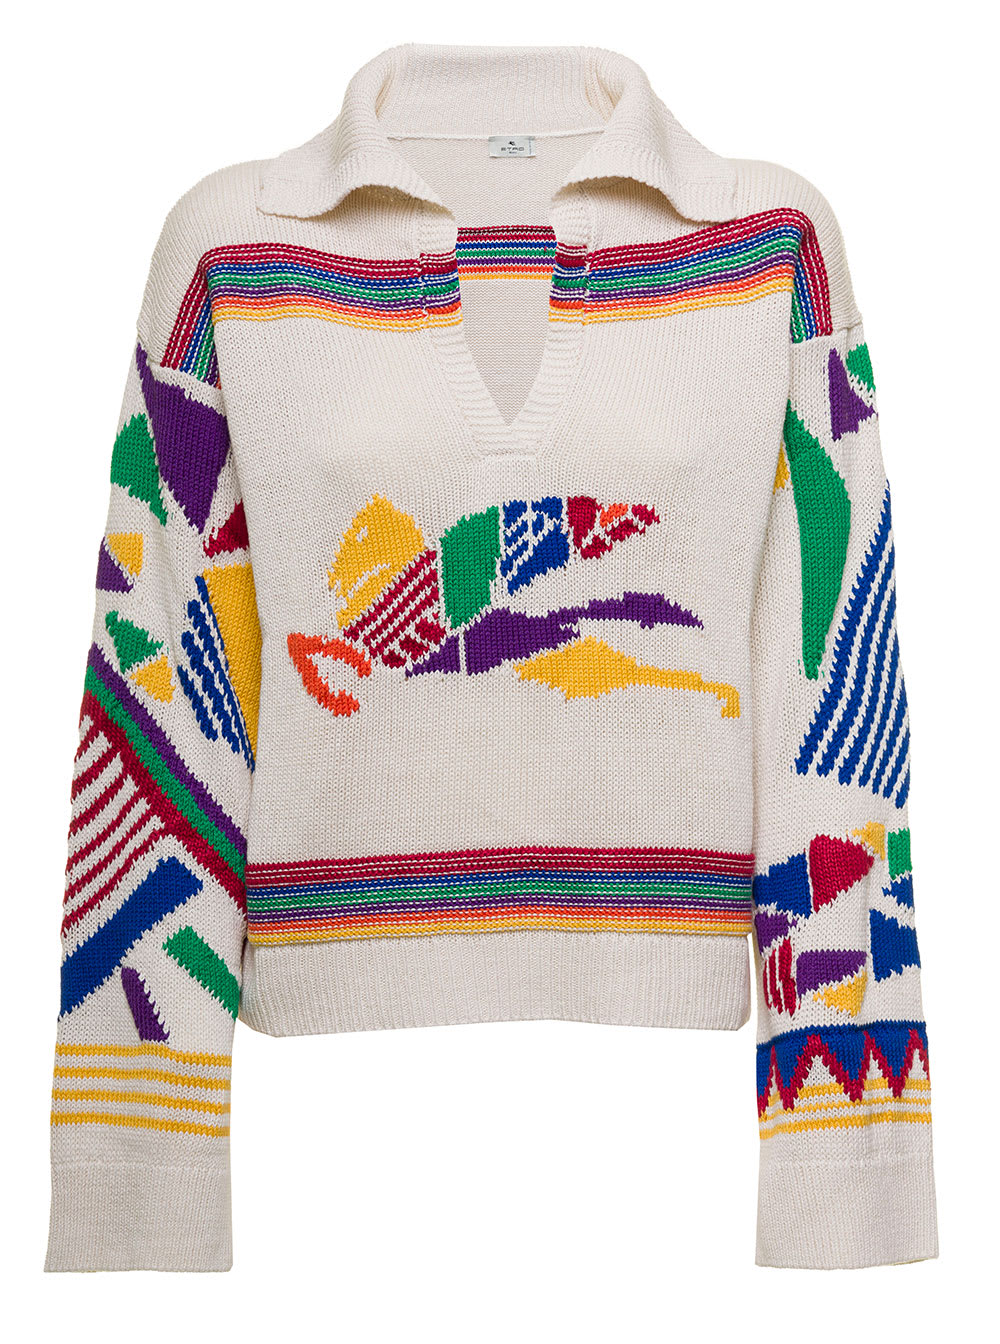 Etro Womans Cotton And Linen Ikat Printed Sweater